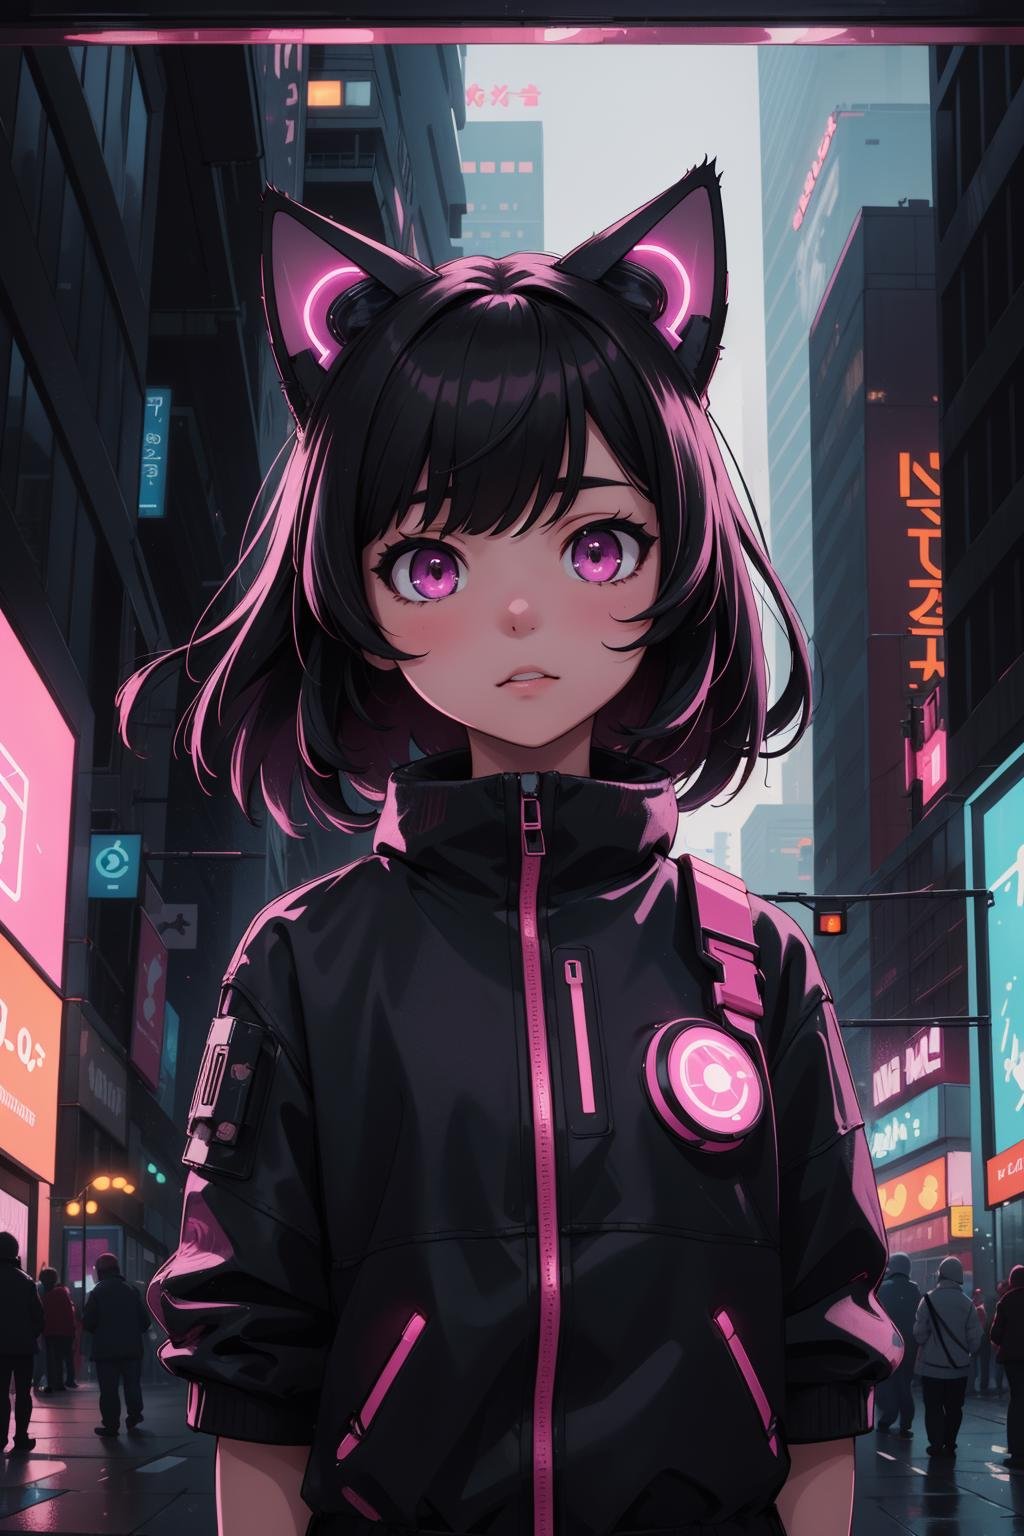 (masterpiece:1.1), (highest quality:1.1), (HDR:1.0), evening, cityscape, 1girl, solo, cat_ears, ears_down, looking_at_viewer, upper_body, black_hair, pink_eyes, outdoors, cyberpunk, science_fiction, neon_lights